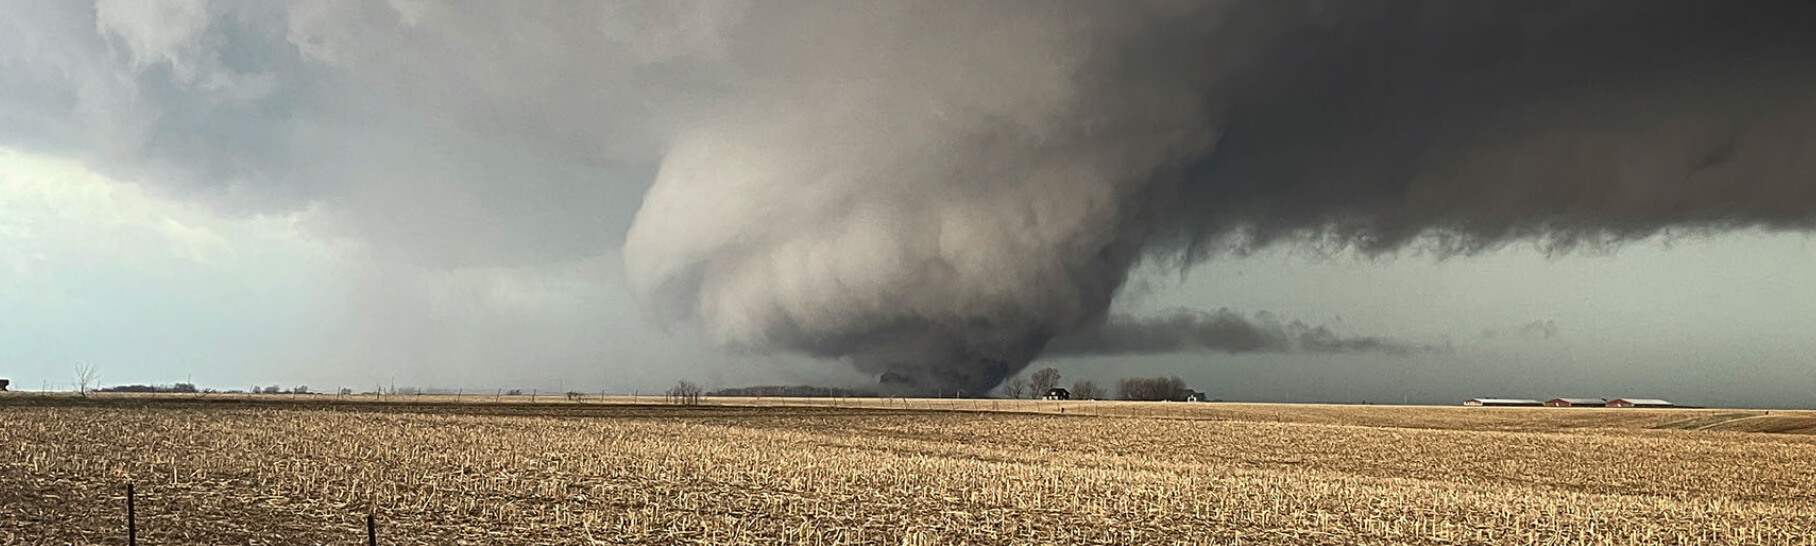 March 31, 2023 tornado in Iowa to spotlight the state's severe spring weather